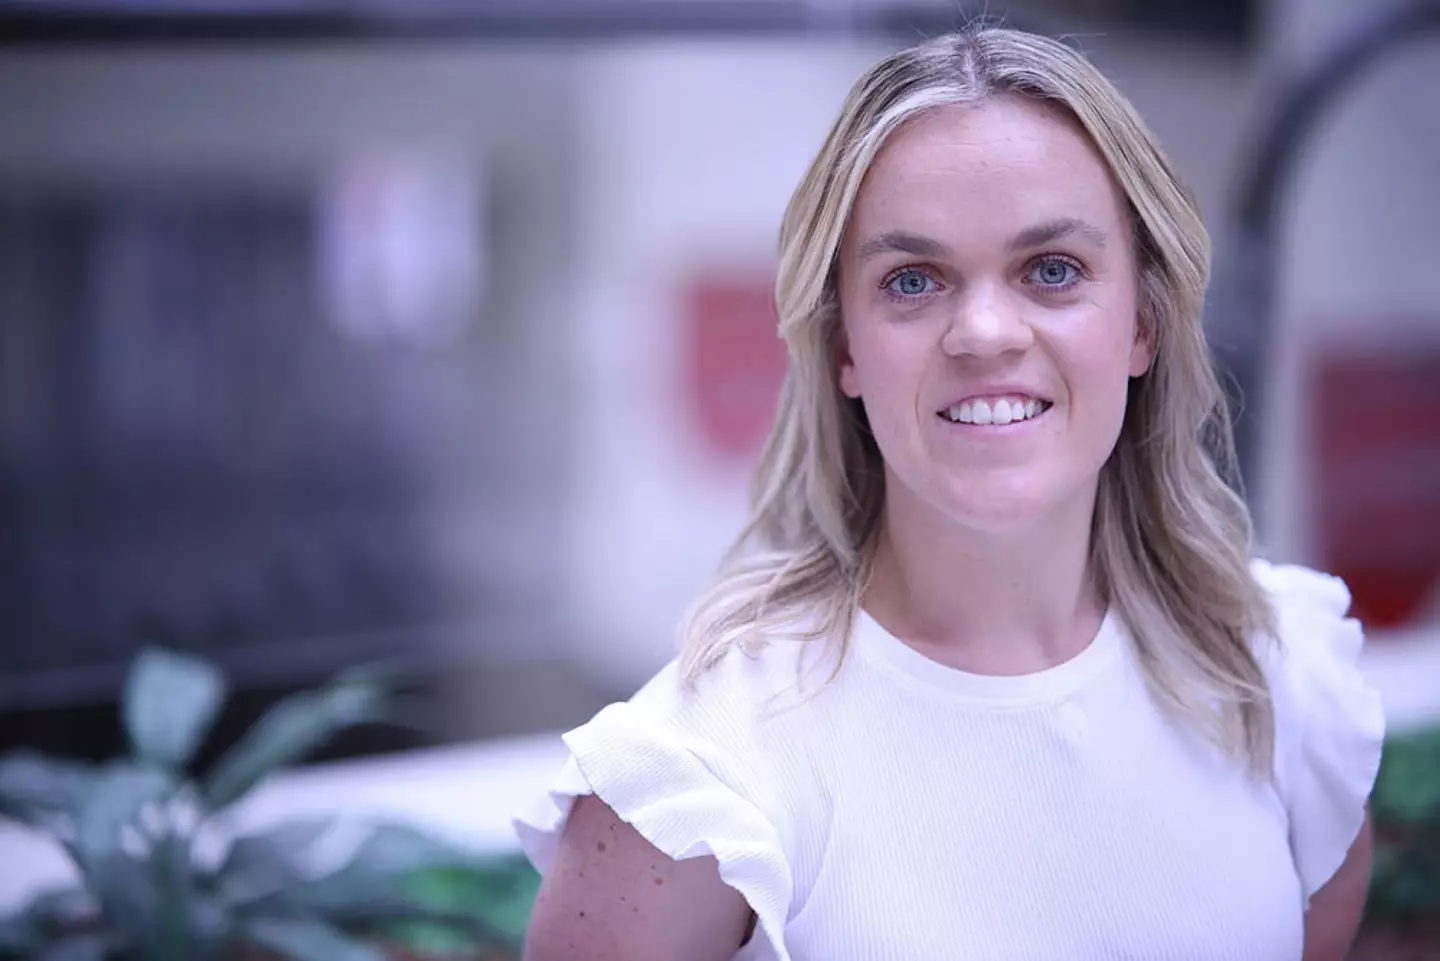 Ellie Simmonds goes on a journey of self discovery in the new documentary.